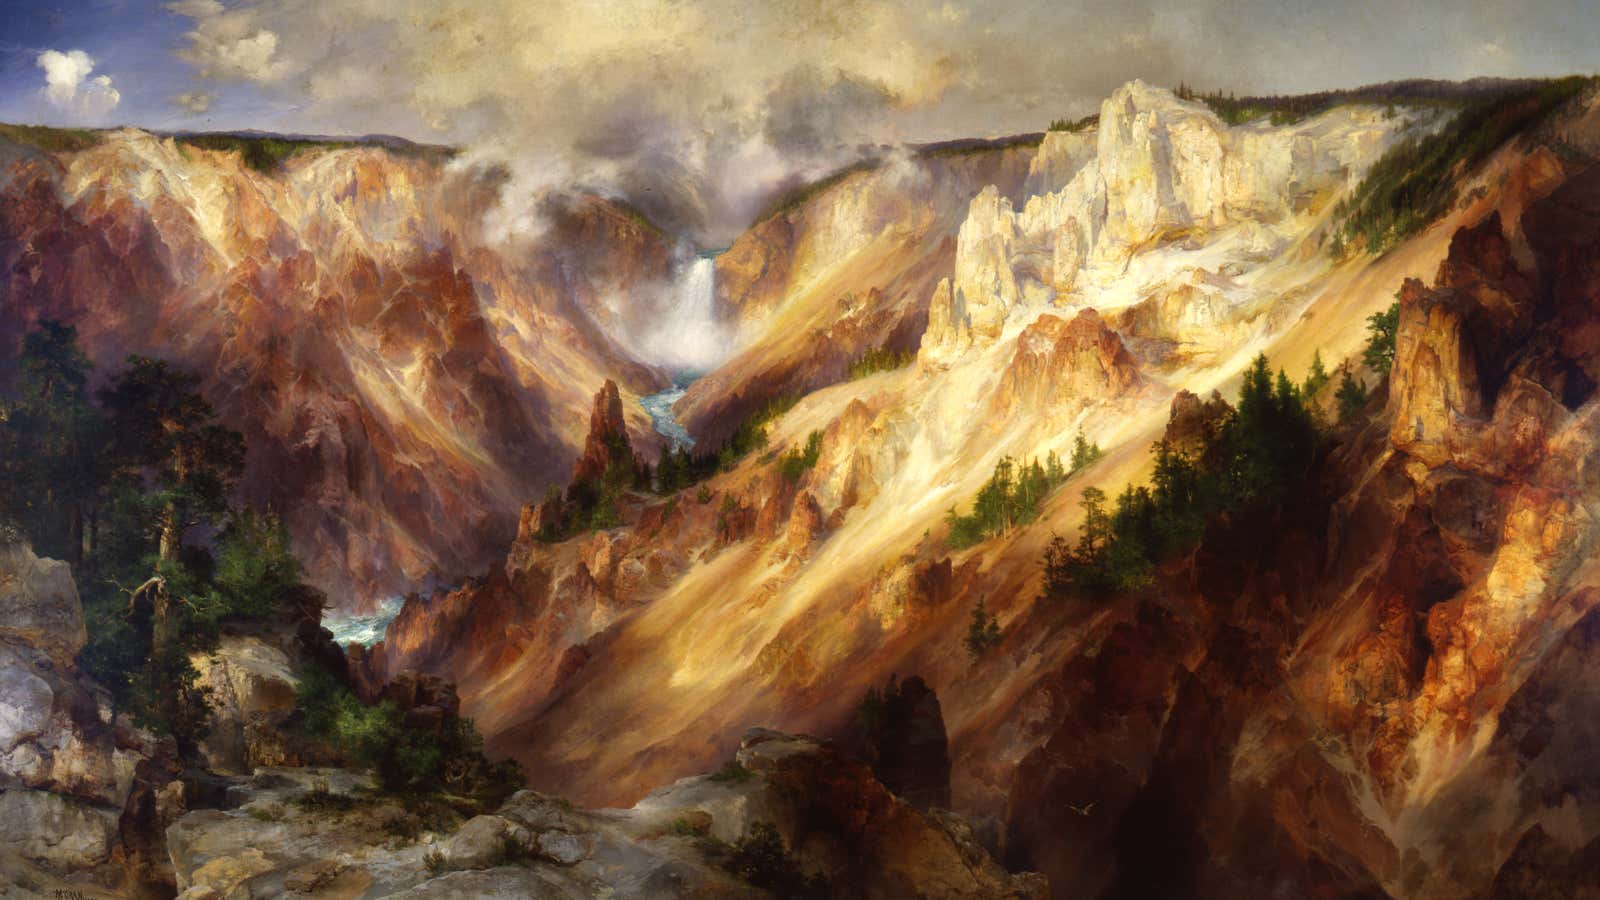 “The Grand Canyon of the Yellowstone” by Thomas Moran (1893-1901)